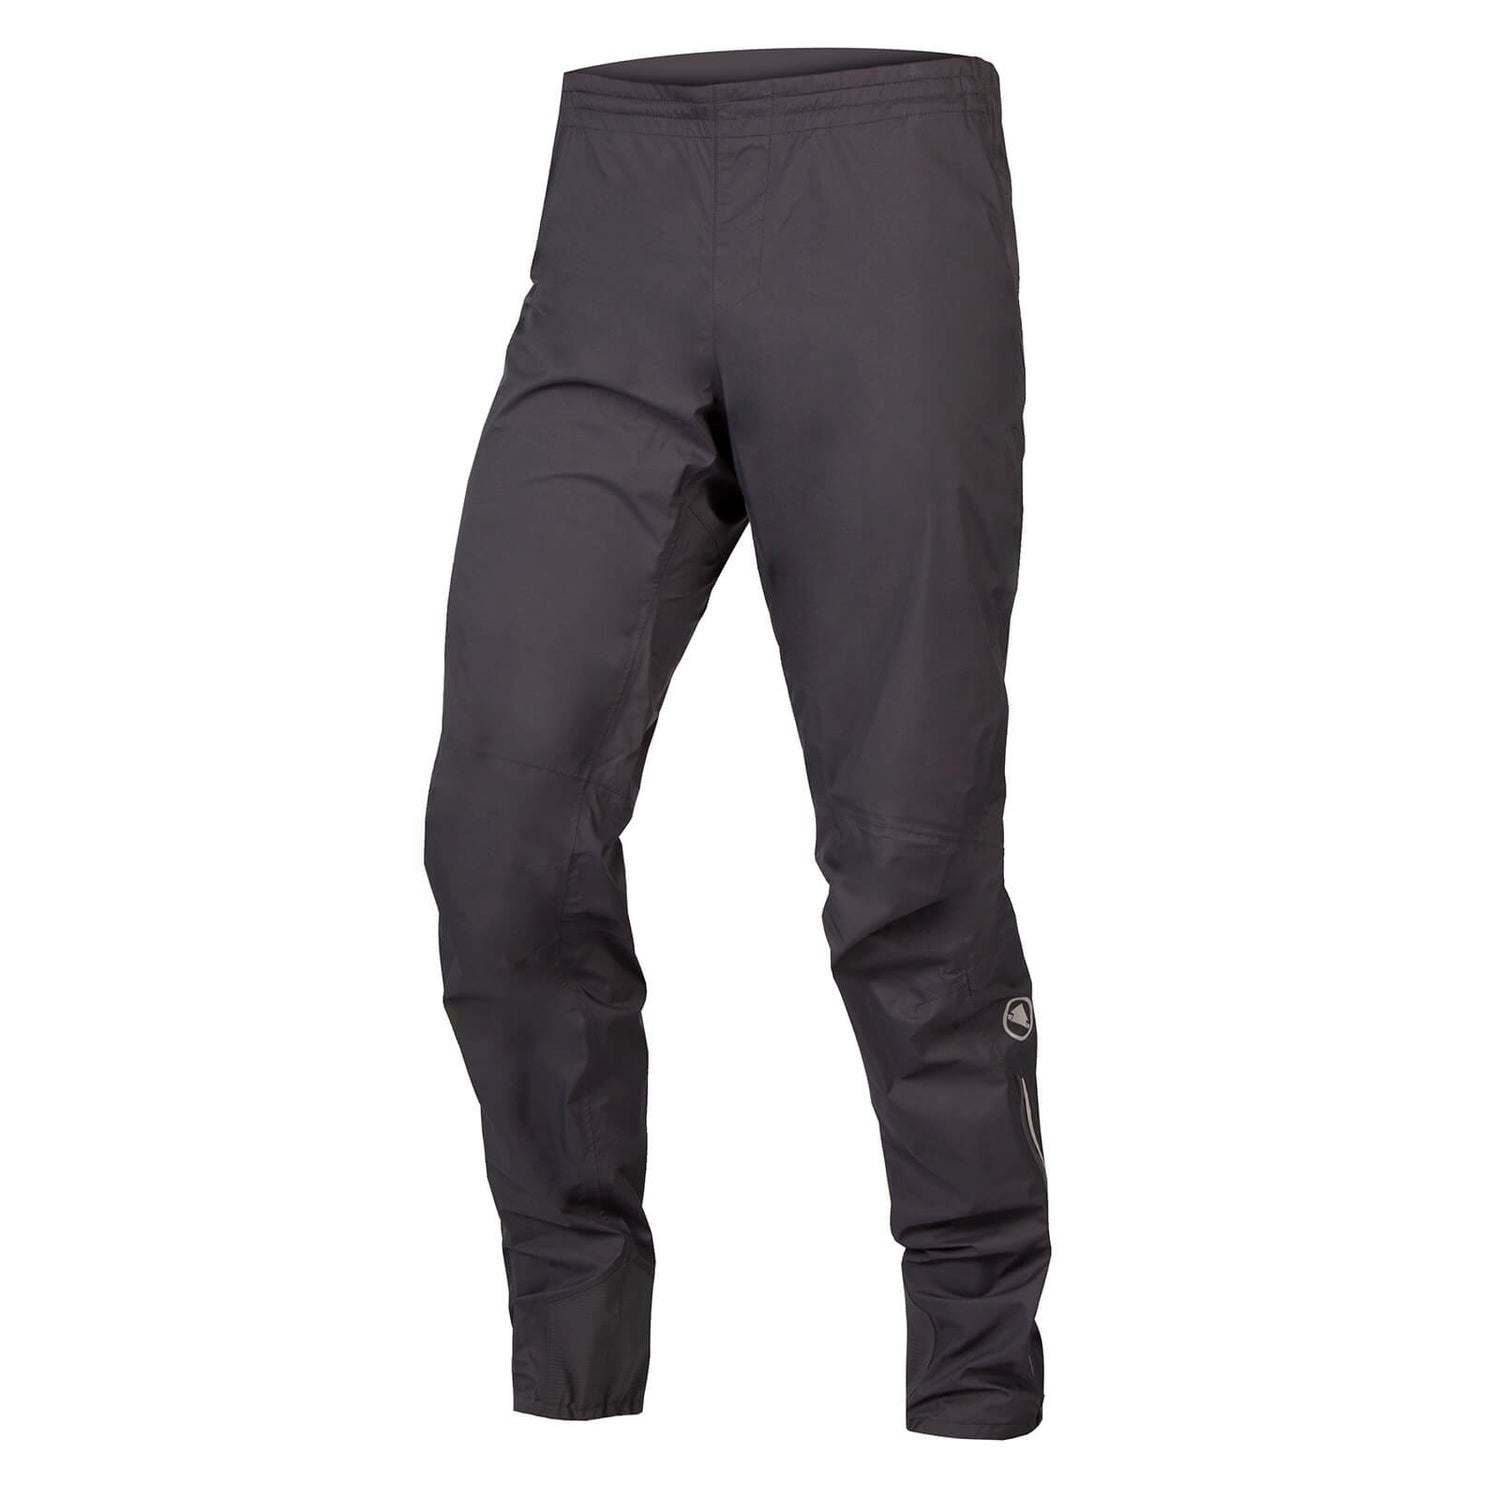 GV500 Waterproof Trouser - Anthracite - XS